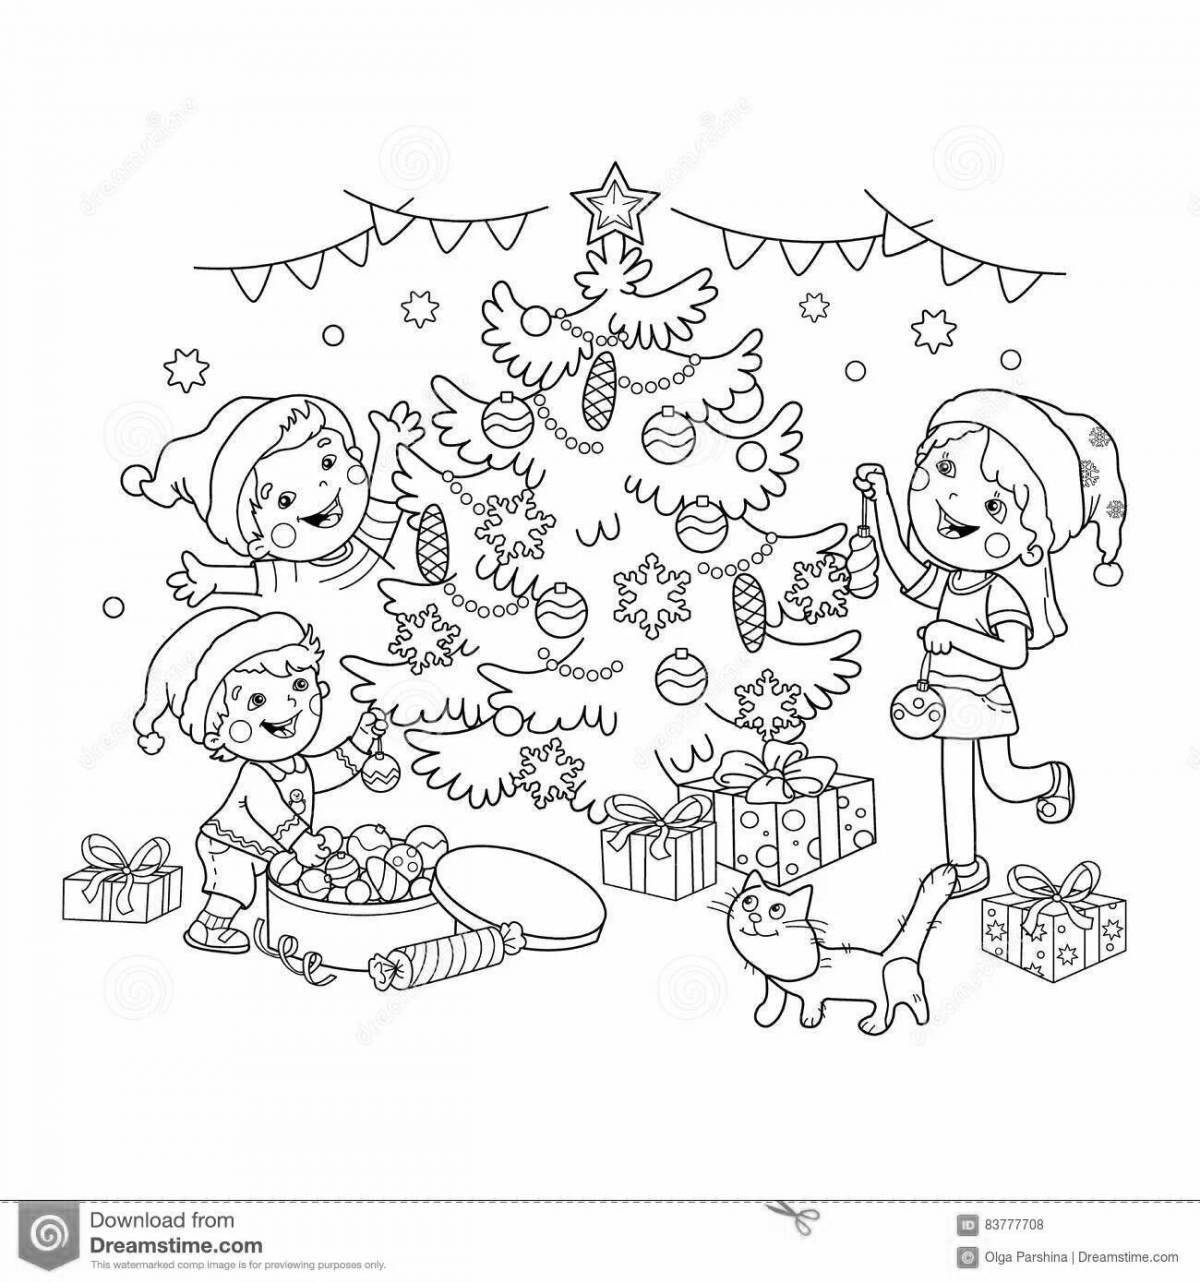 Playful children decorate the Christmas tree